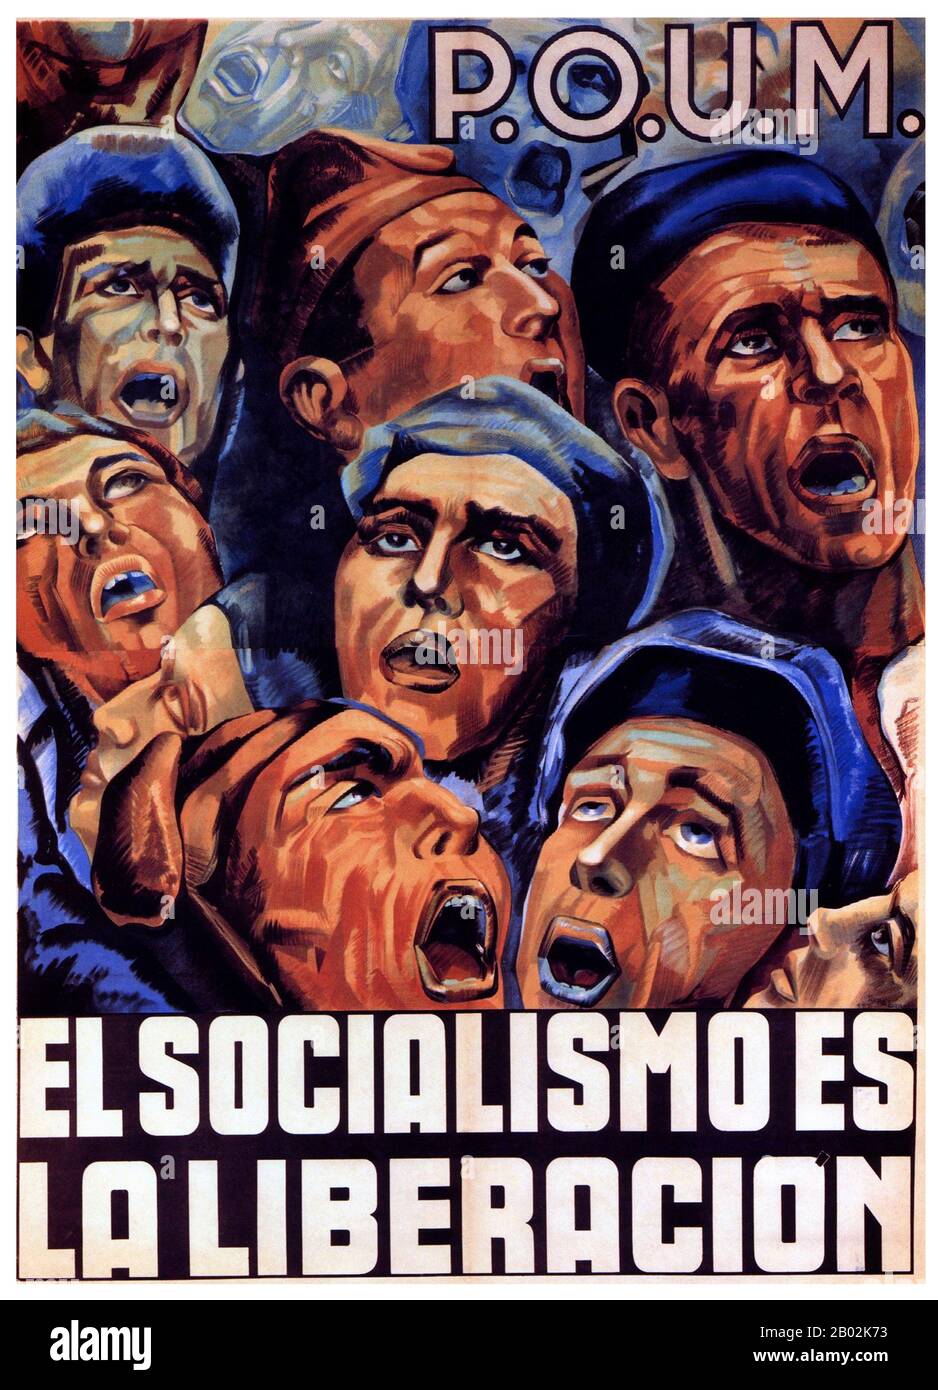 The Workers' Party of Marxist Unification (Spanish: Partido Obrero de Unificación Marxista, POUM; Catalan: Partit Obrer d'Unificació Marxista) was a Spanish communist political party formed during the Second Republic and mainly active around the Spanish Civil War.  The Spanish Civil War was fought from 17 July 1936 to 1 April 1939 between the Republicans, who were loyal to the democratically elected Spanish Republic, and the Nationalists, a rebel group led by General Francisco Franco. The Nationalists prevailed, and Franco ruled Spain for the next 36 years, from 1939 until his death in 1975. Stock Photo